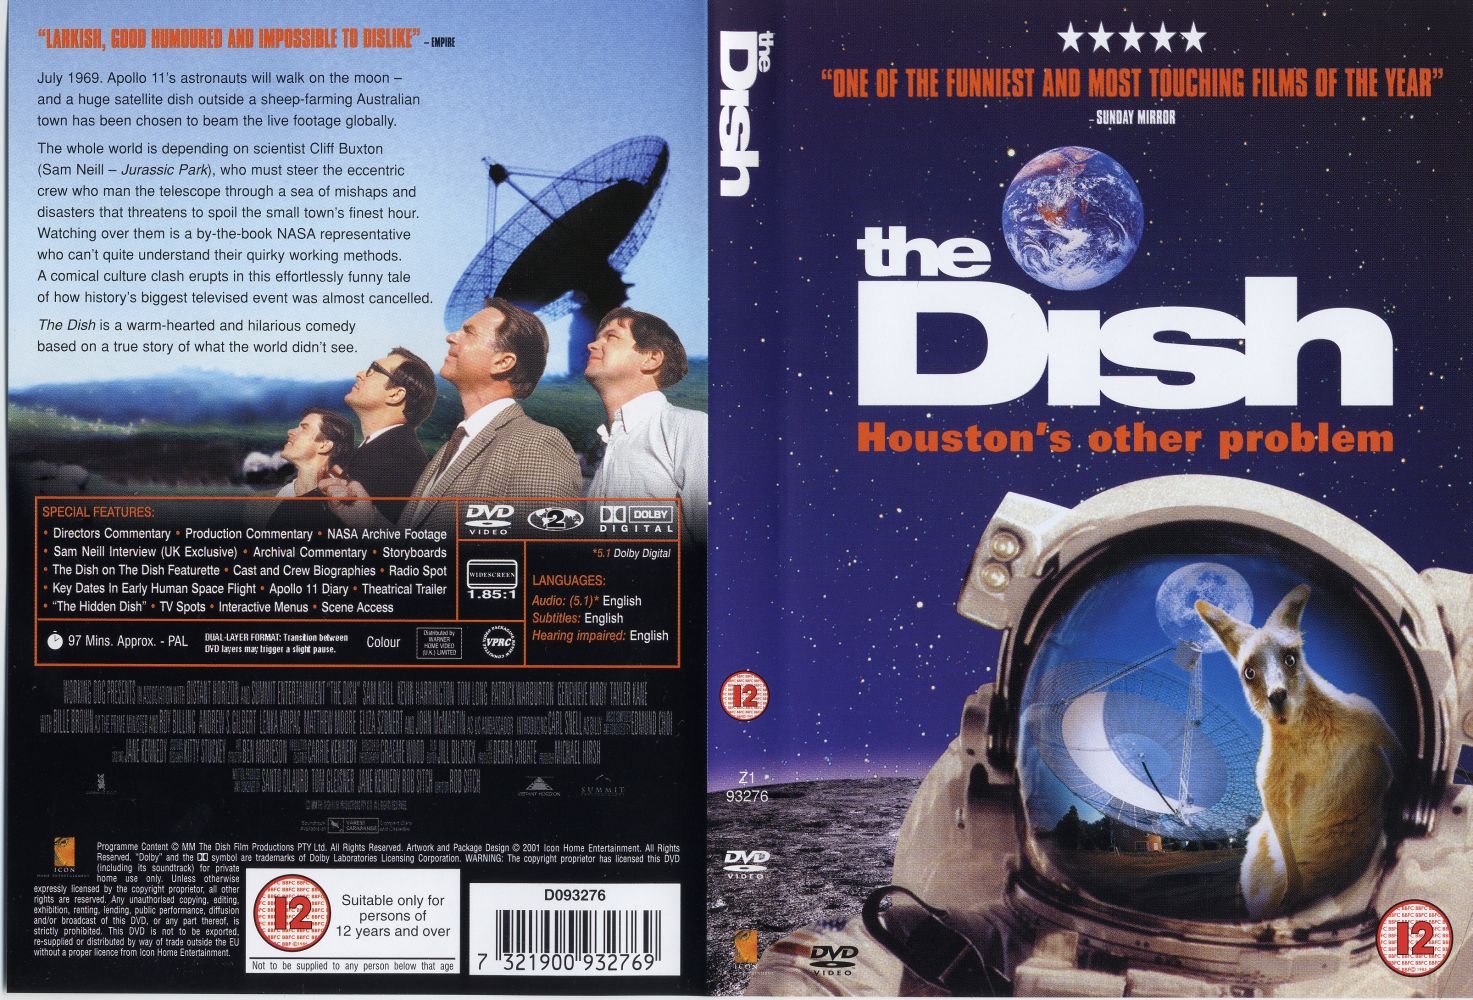 Jaquette DVD The dish Zone 1